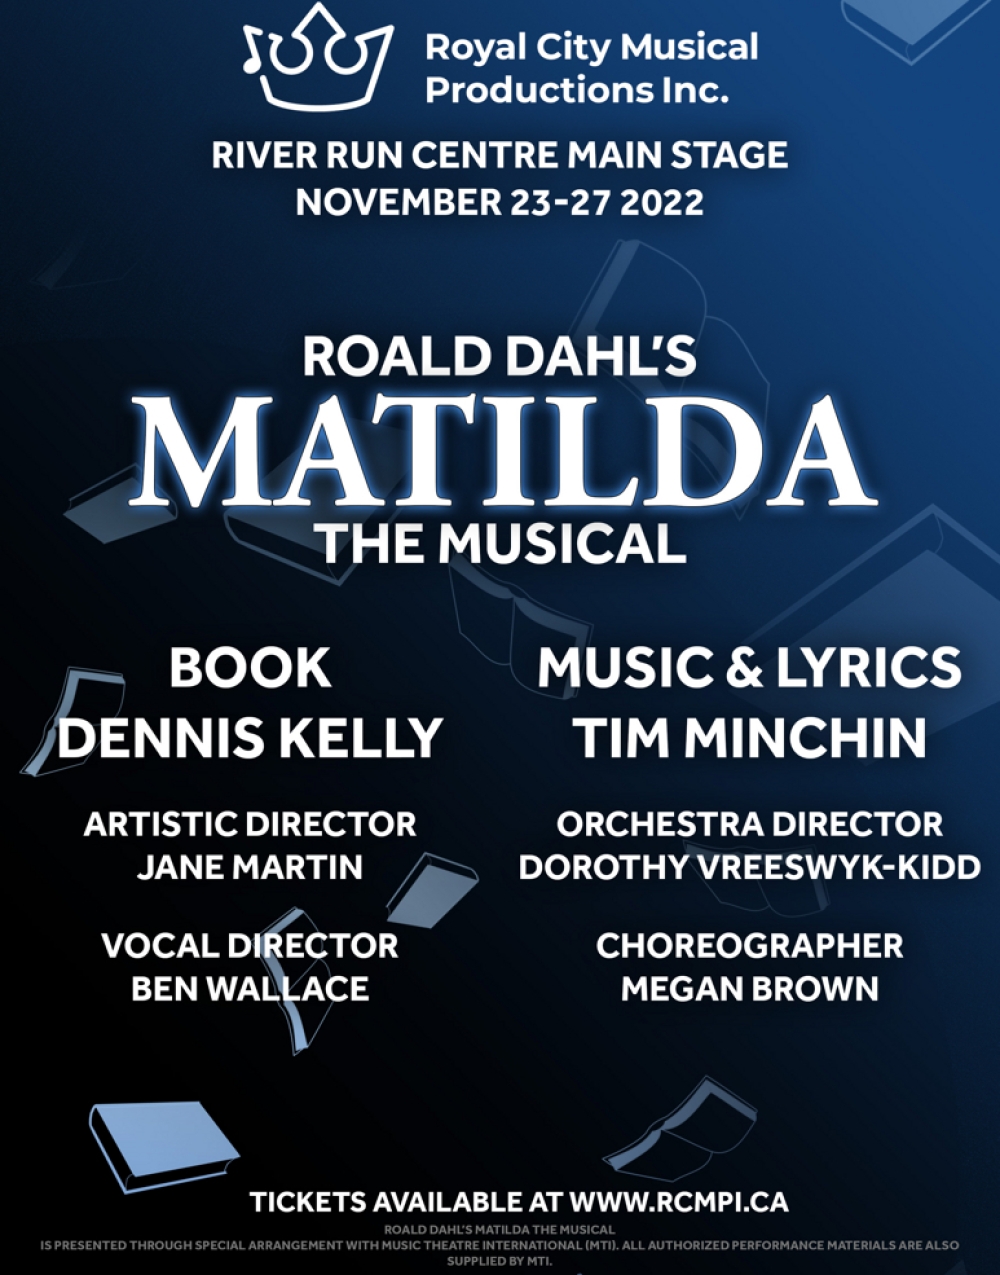 Roald Dahl's Matilda The Musical at River Run Centre, Main Stage